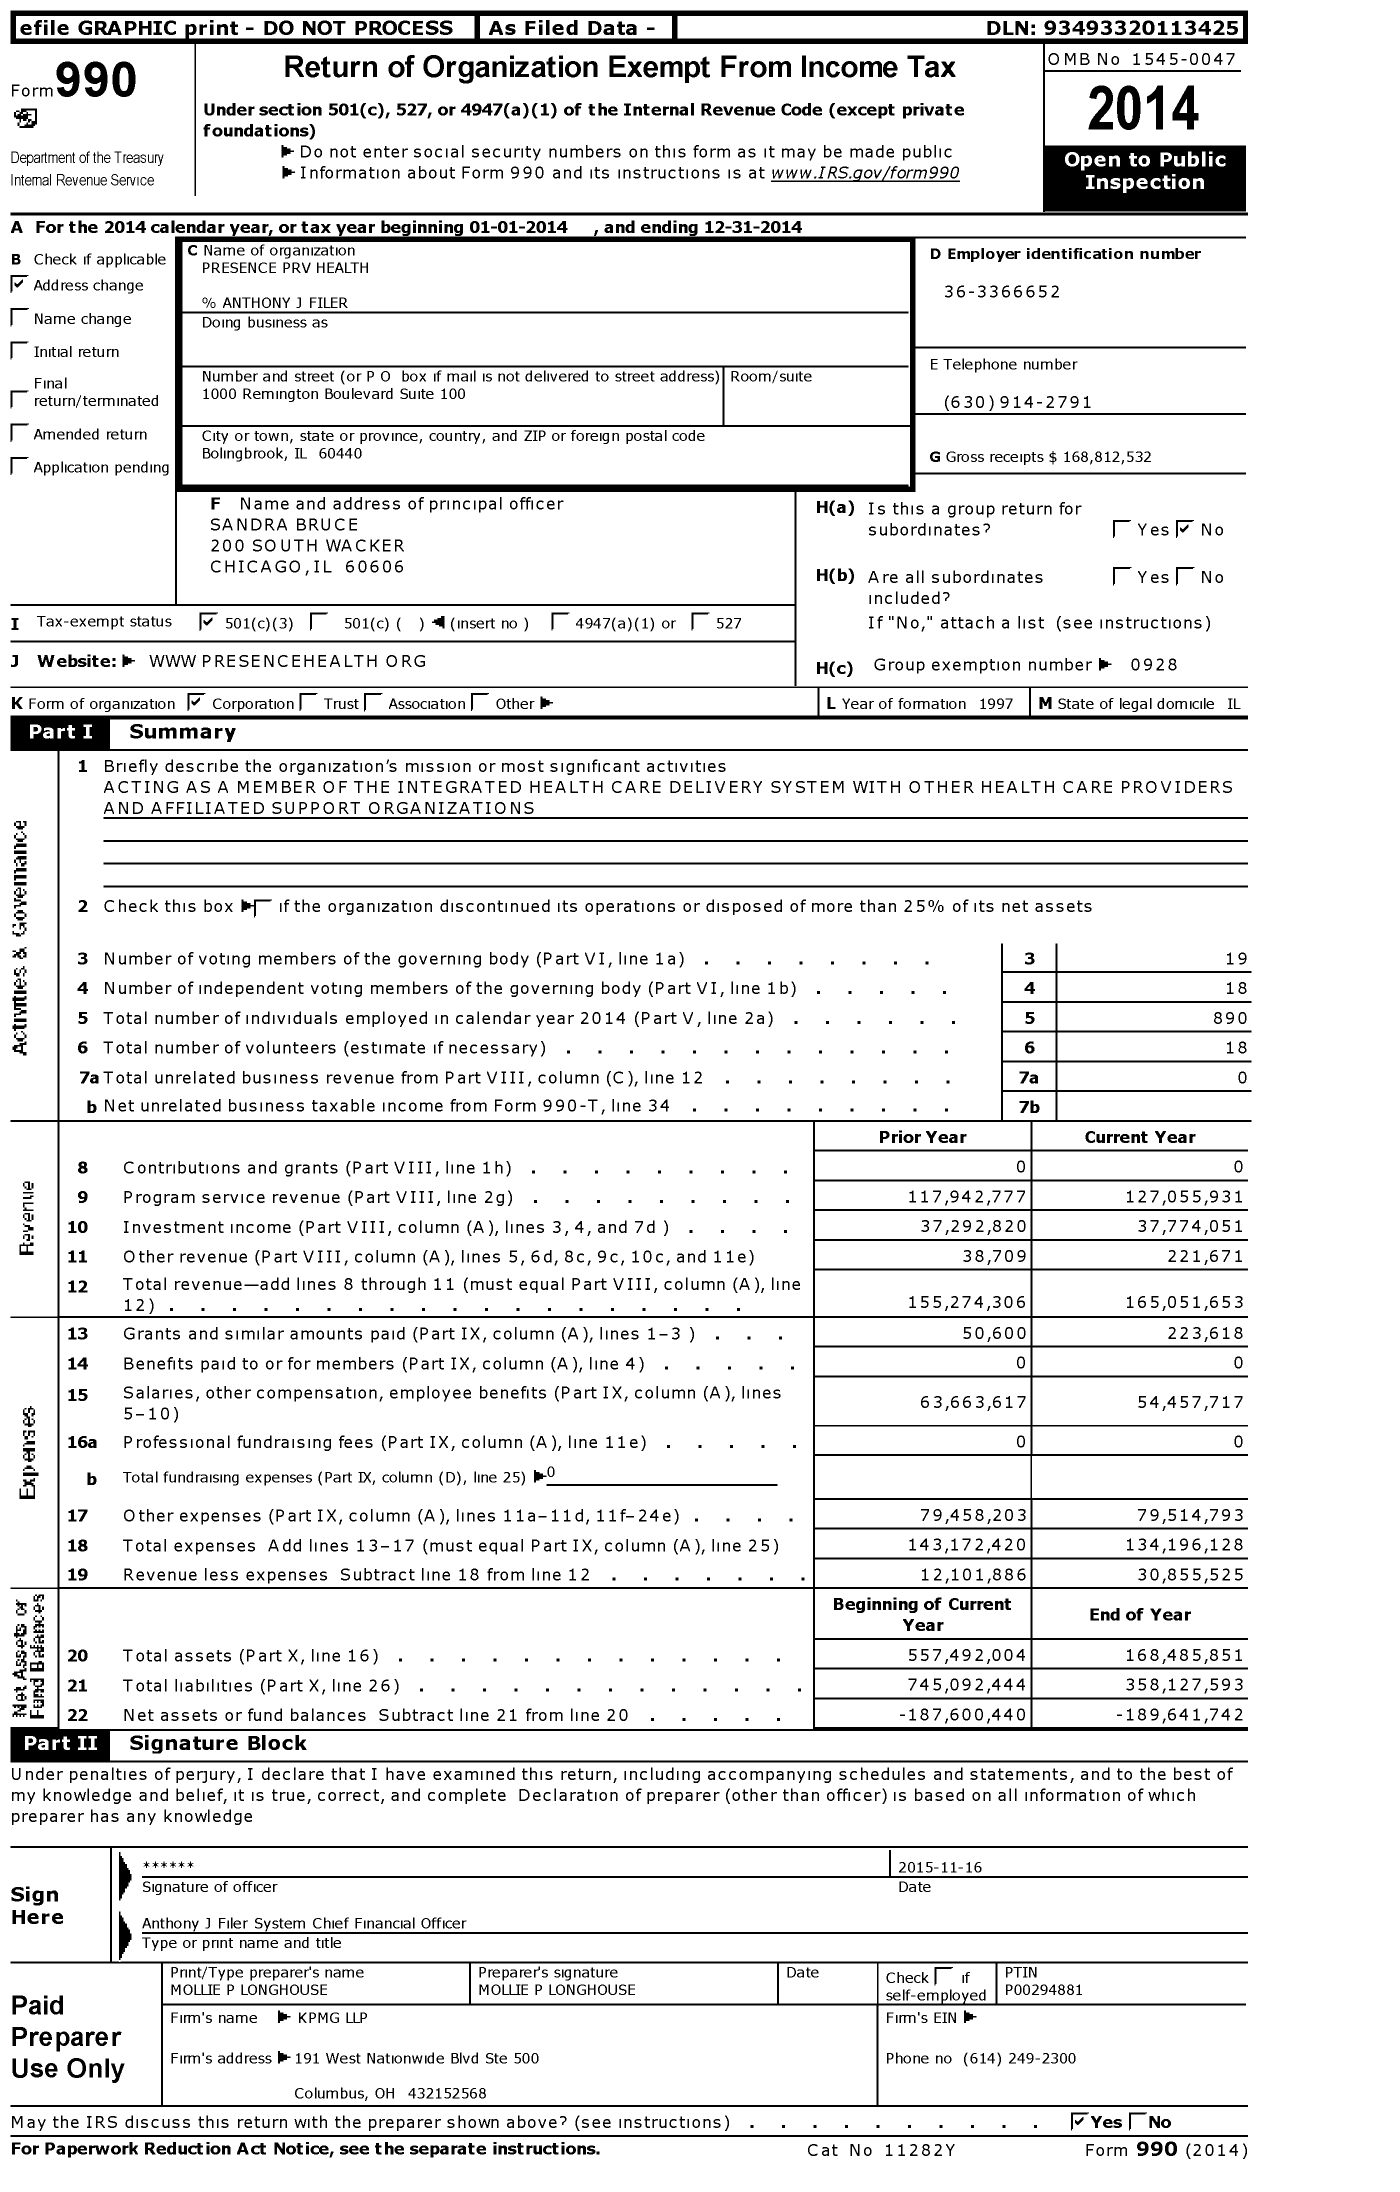 Image of first page of 2014 Form 990 for Presence Health Presence Healthcare Presence Health Care